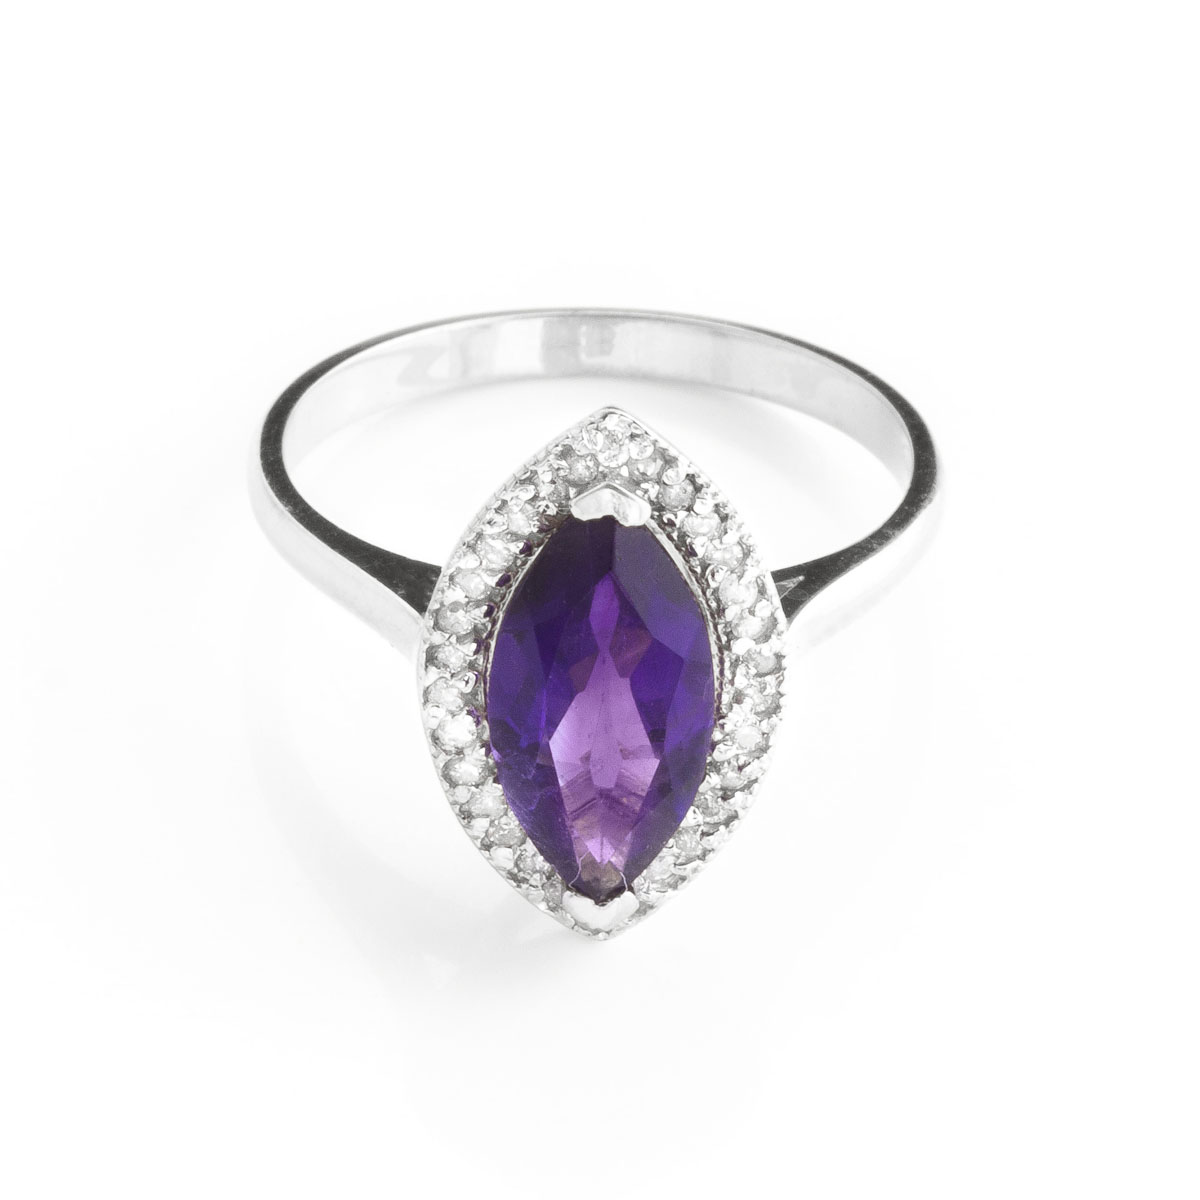 Amethyst Halo Ring 1.8 ctw in 18ct White Gold